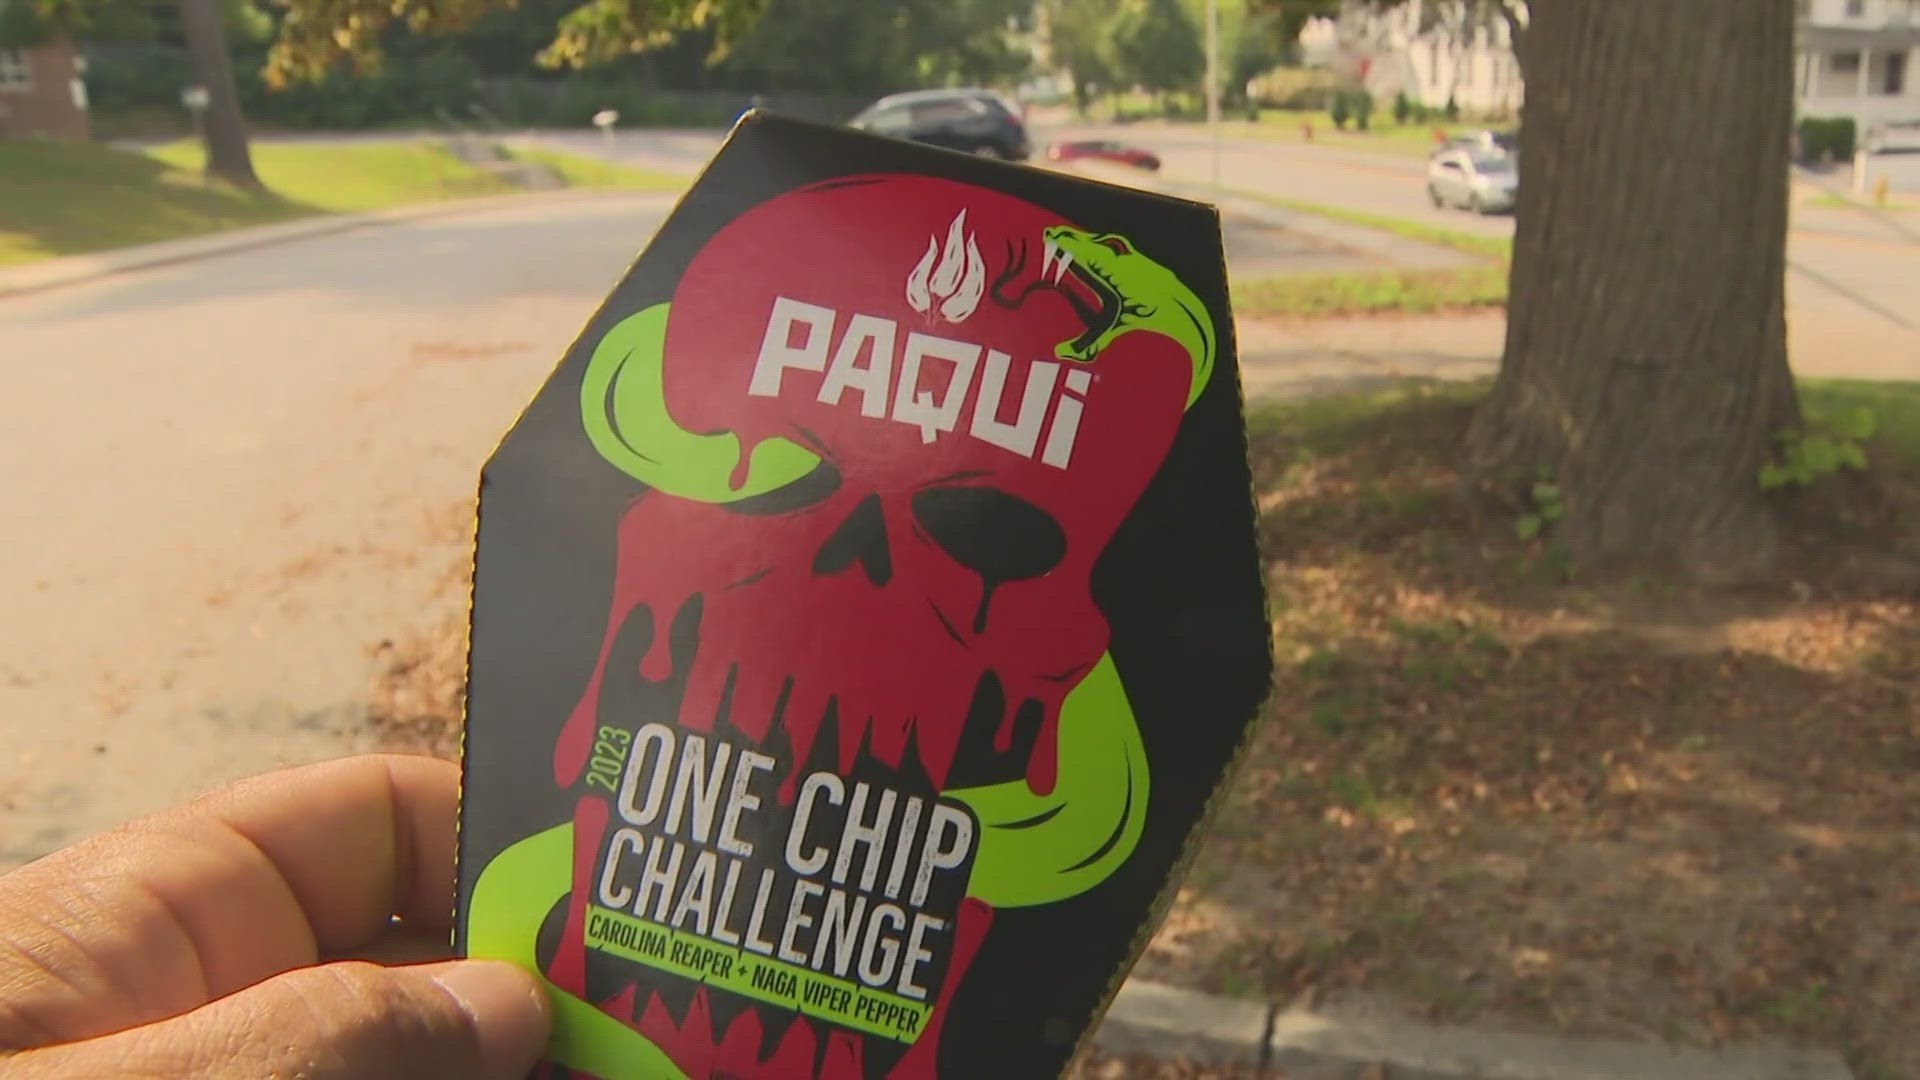 Parents Warned About 'One Chip Challenge' After Worcester Teen's Death